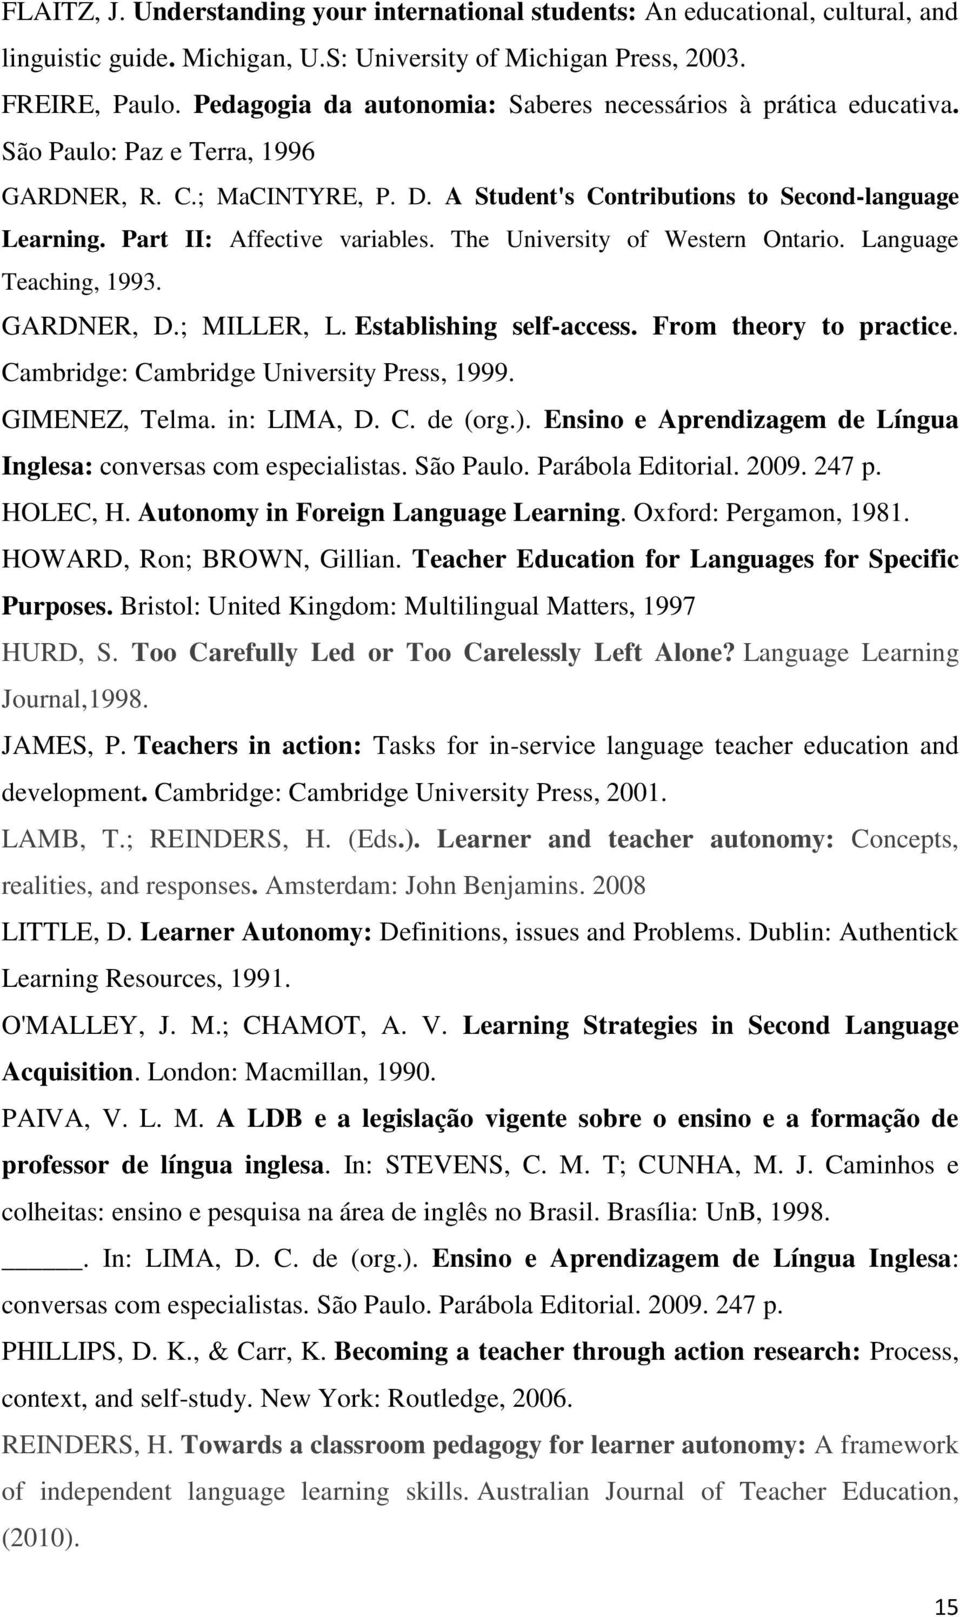 Part II: Affective variables. The University of Western Ontario. Language Teaching, 1993. GARDNER, D.; MILLER, L. Establishing self-access. From theory to practice.